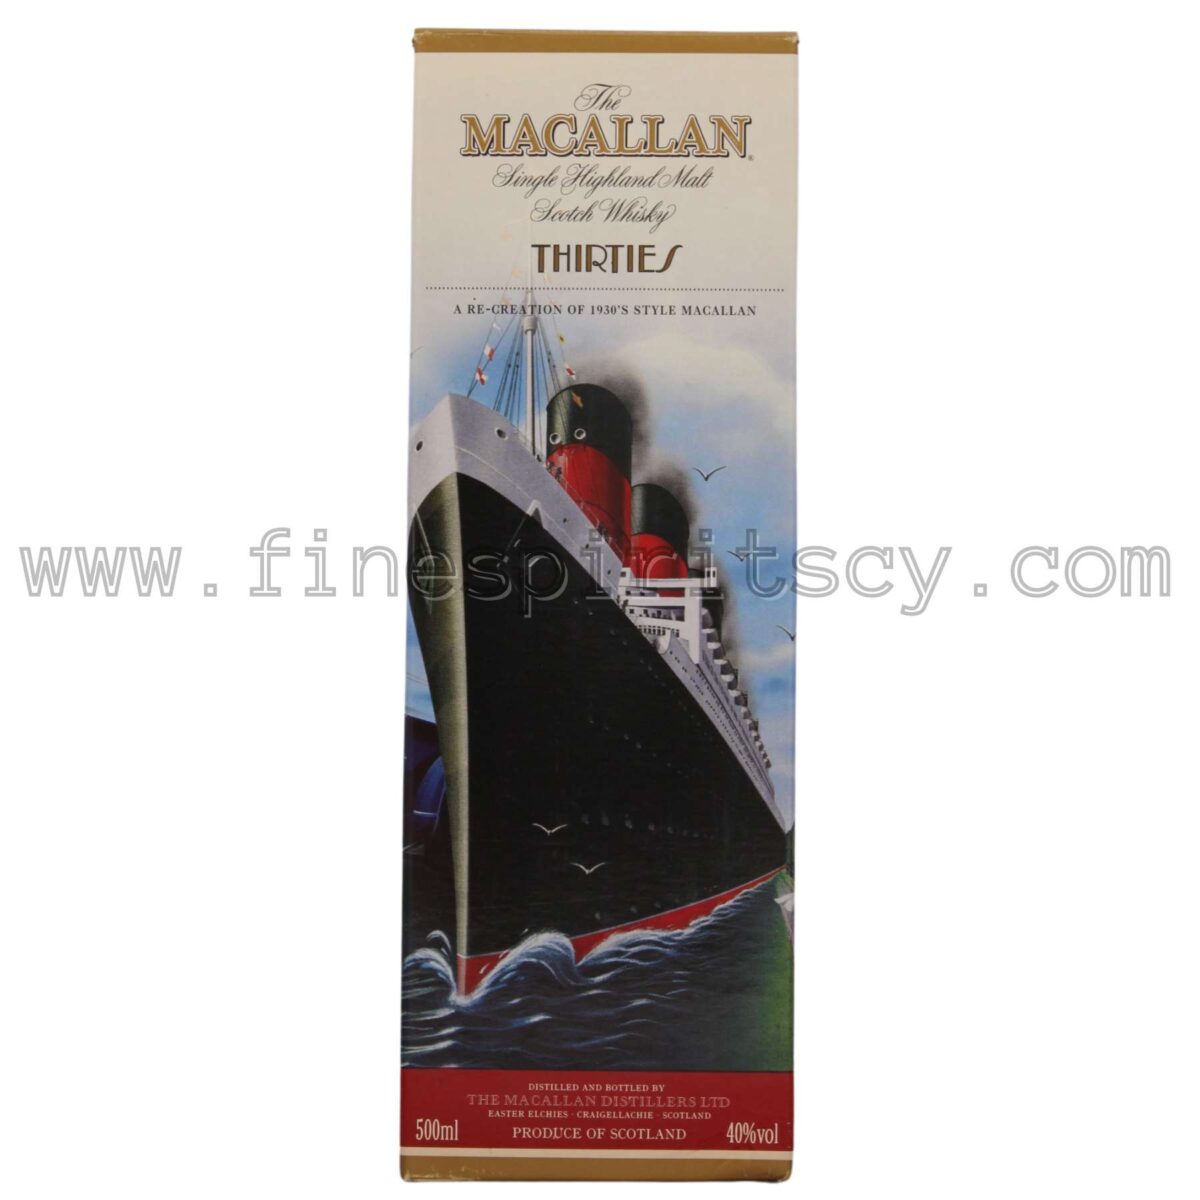 Macallan 1930s Thirties Cyprus Price FSCY Limited Edition Collection Travel Series Retail